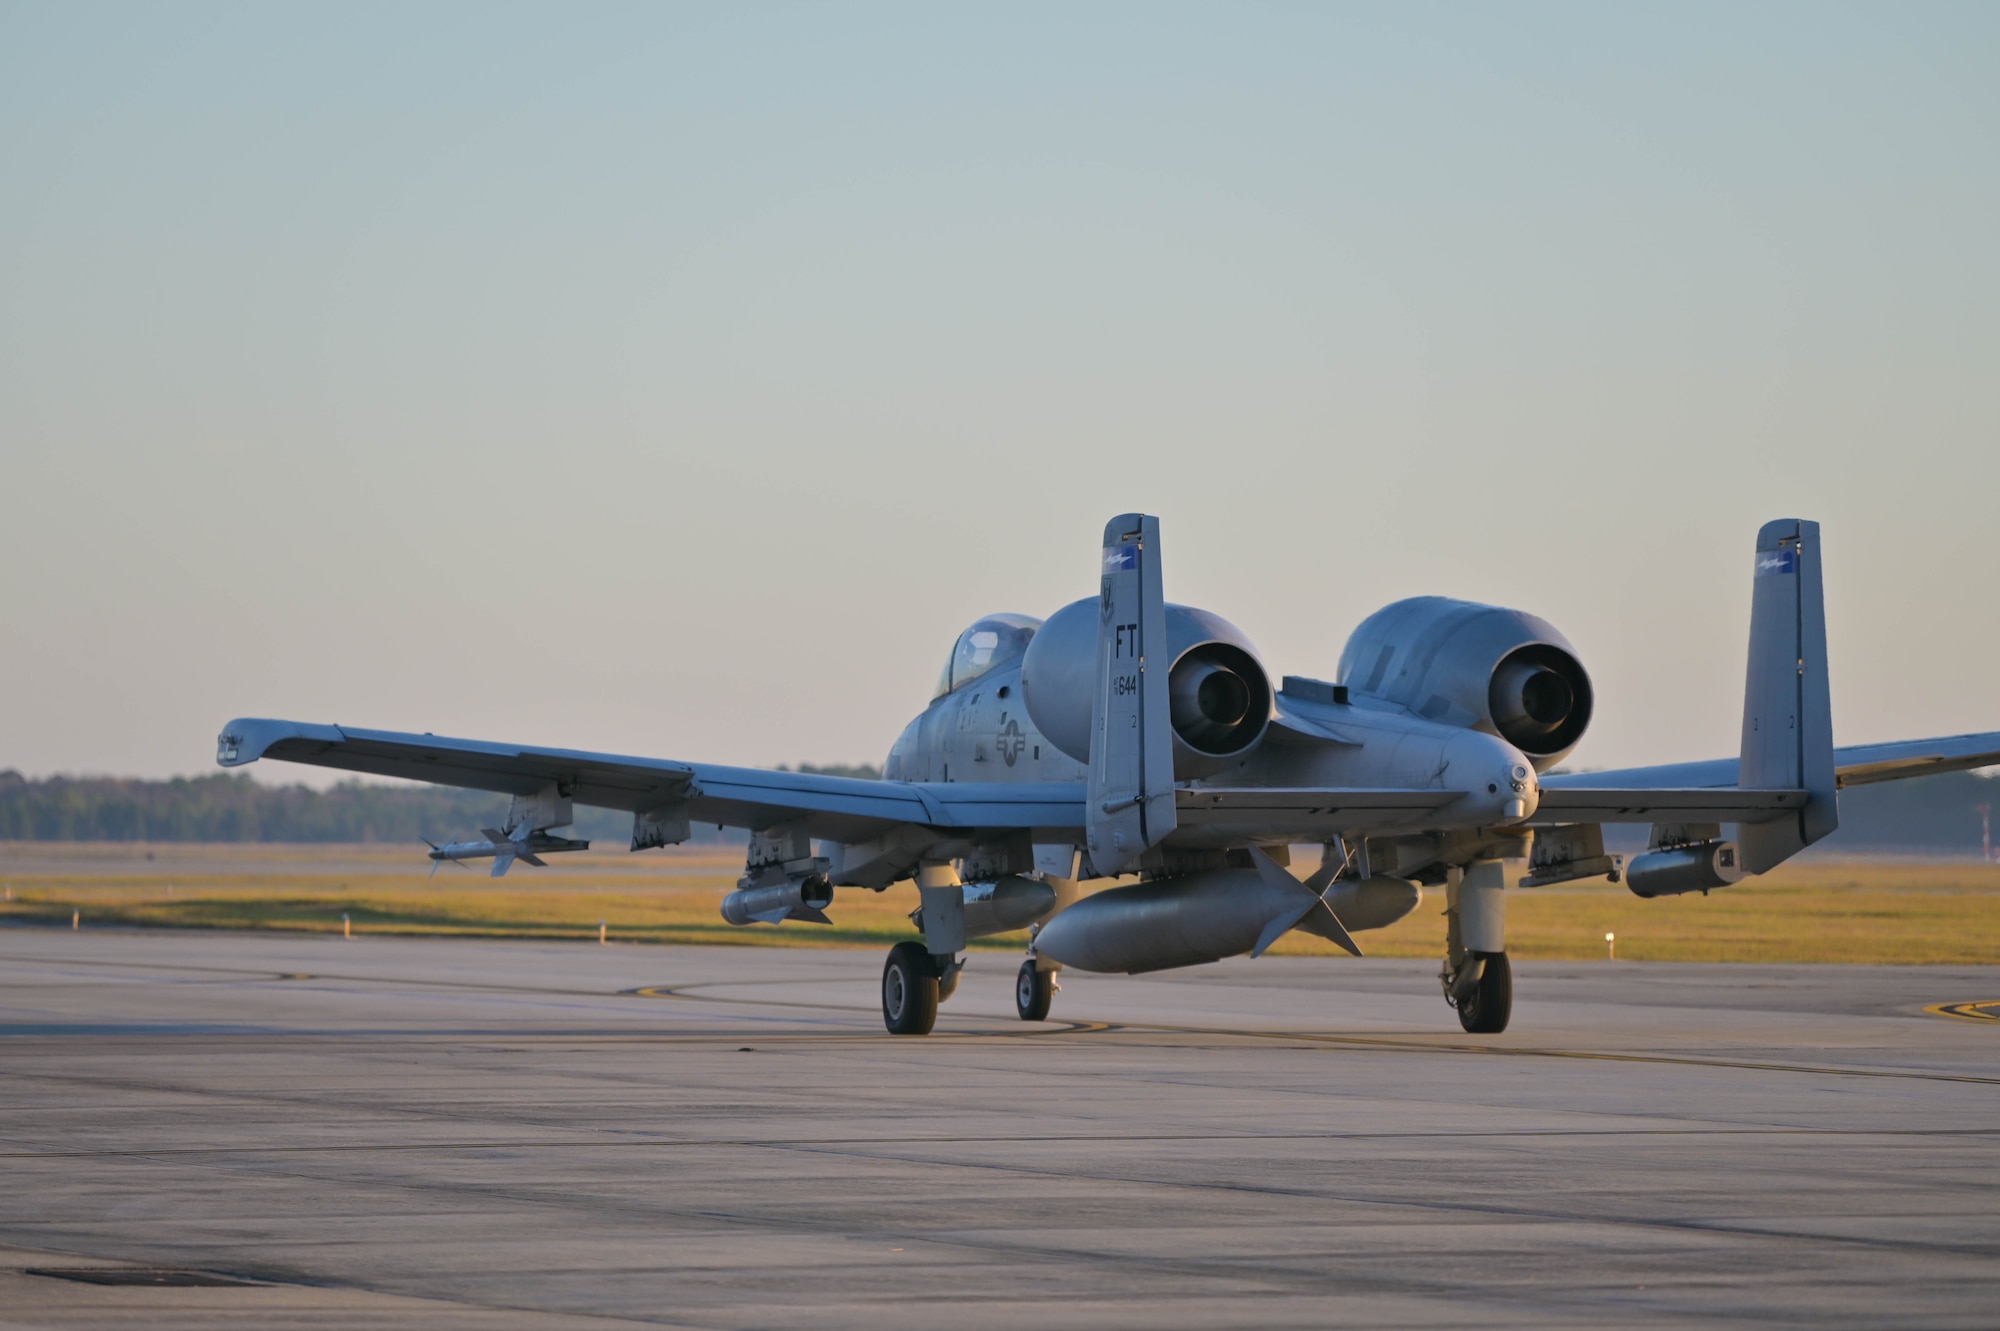 U.S. Air Force Capt. Matthew Dorsey, 74th Fighter Squadron A-10C Thunderbolt II pilot, taxis the aircraft down the flightline at Moody Air Force Base, Georgia, Oct. 16, 2022.The 23rd Wing deployed A-10C Thunderbolt II aircraft and support personnel to Andersen Air Force Base, Guam for a routine Dynamic Force Employment Operation.(U.S. Air Force photo by Senior Airman Rebeckah Medeiros)